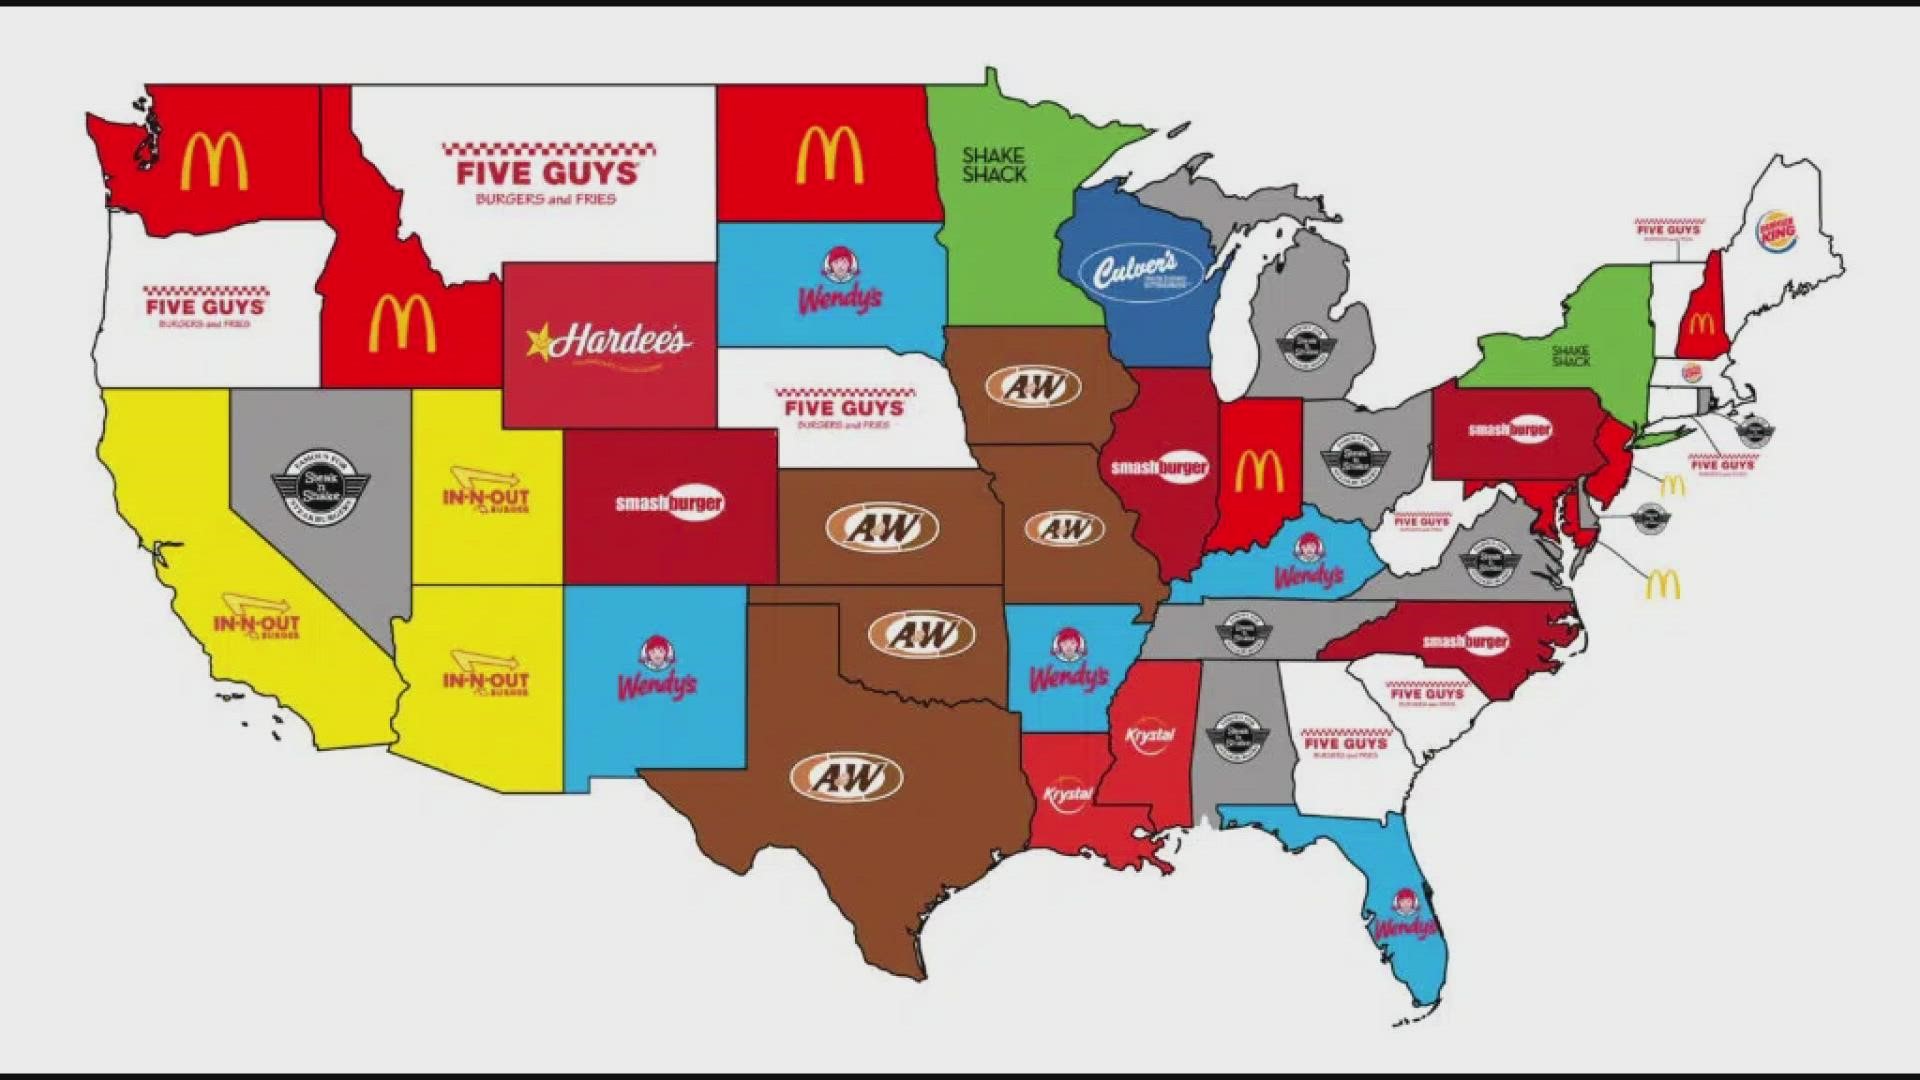 In what world is Whataburger not even in the top 5, let alone not No. 1?